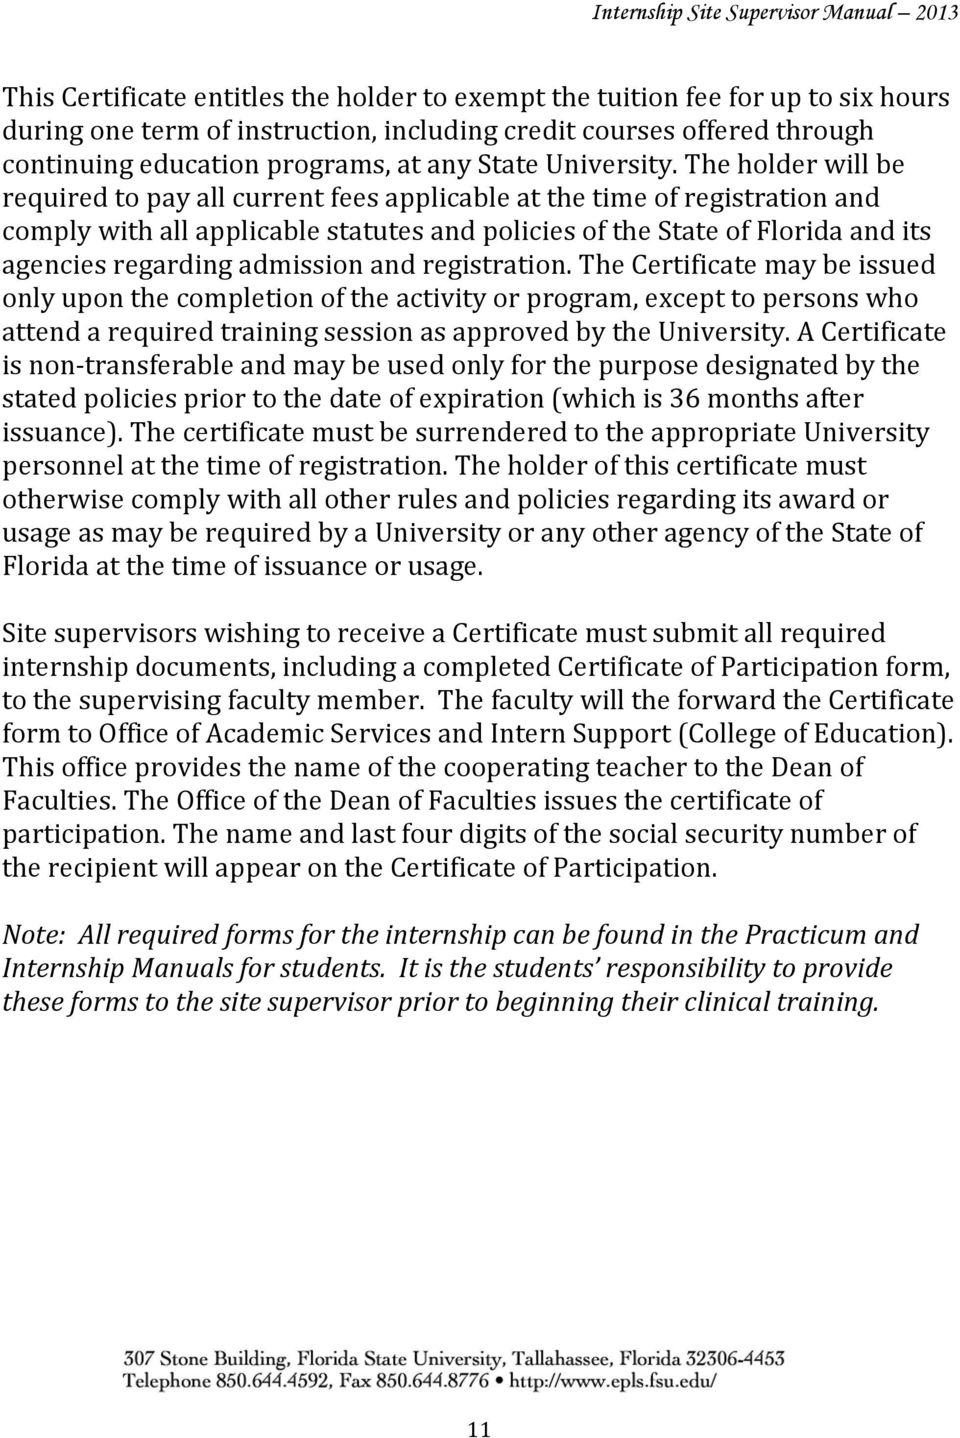 The holder will be required to pay all current fees applicable at the time of registration and comply with all applicable statutes and policies of the State of Florida and its agencies regarding